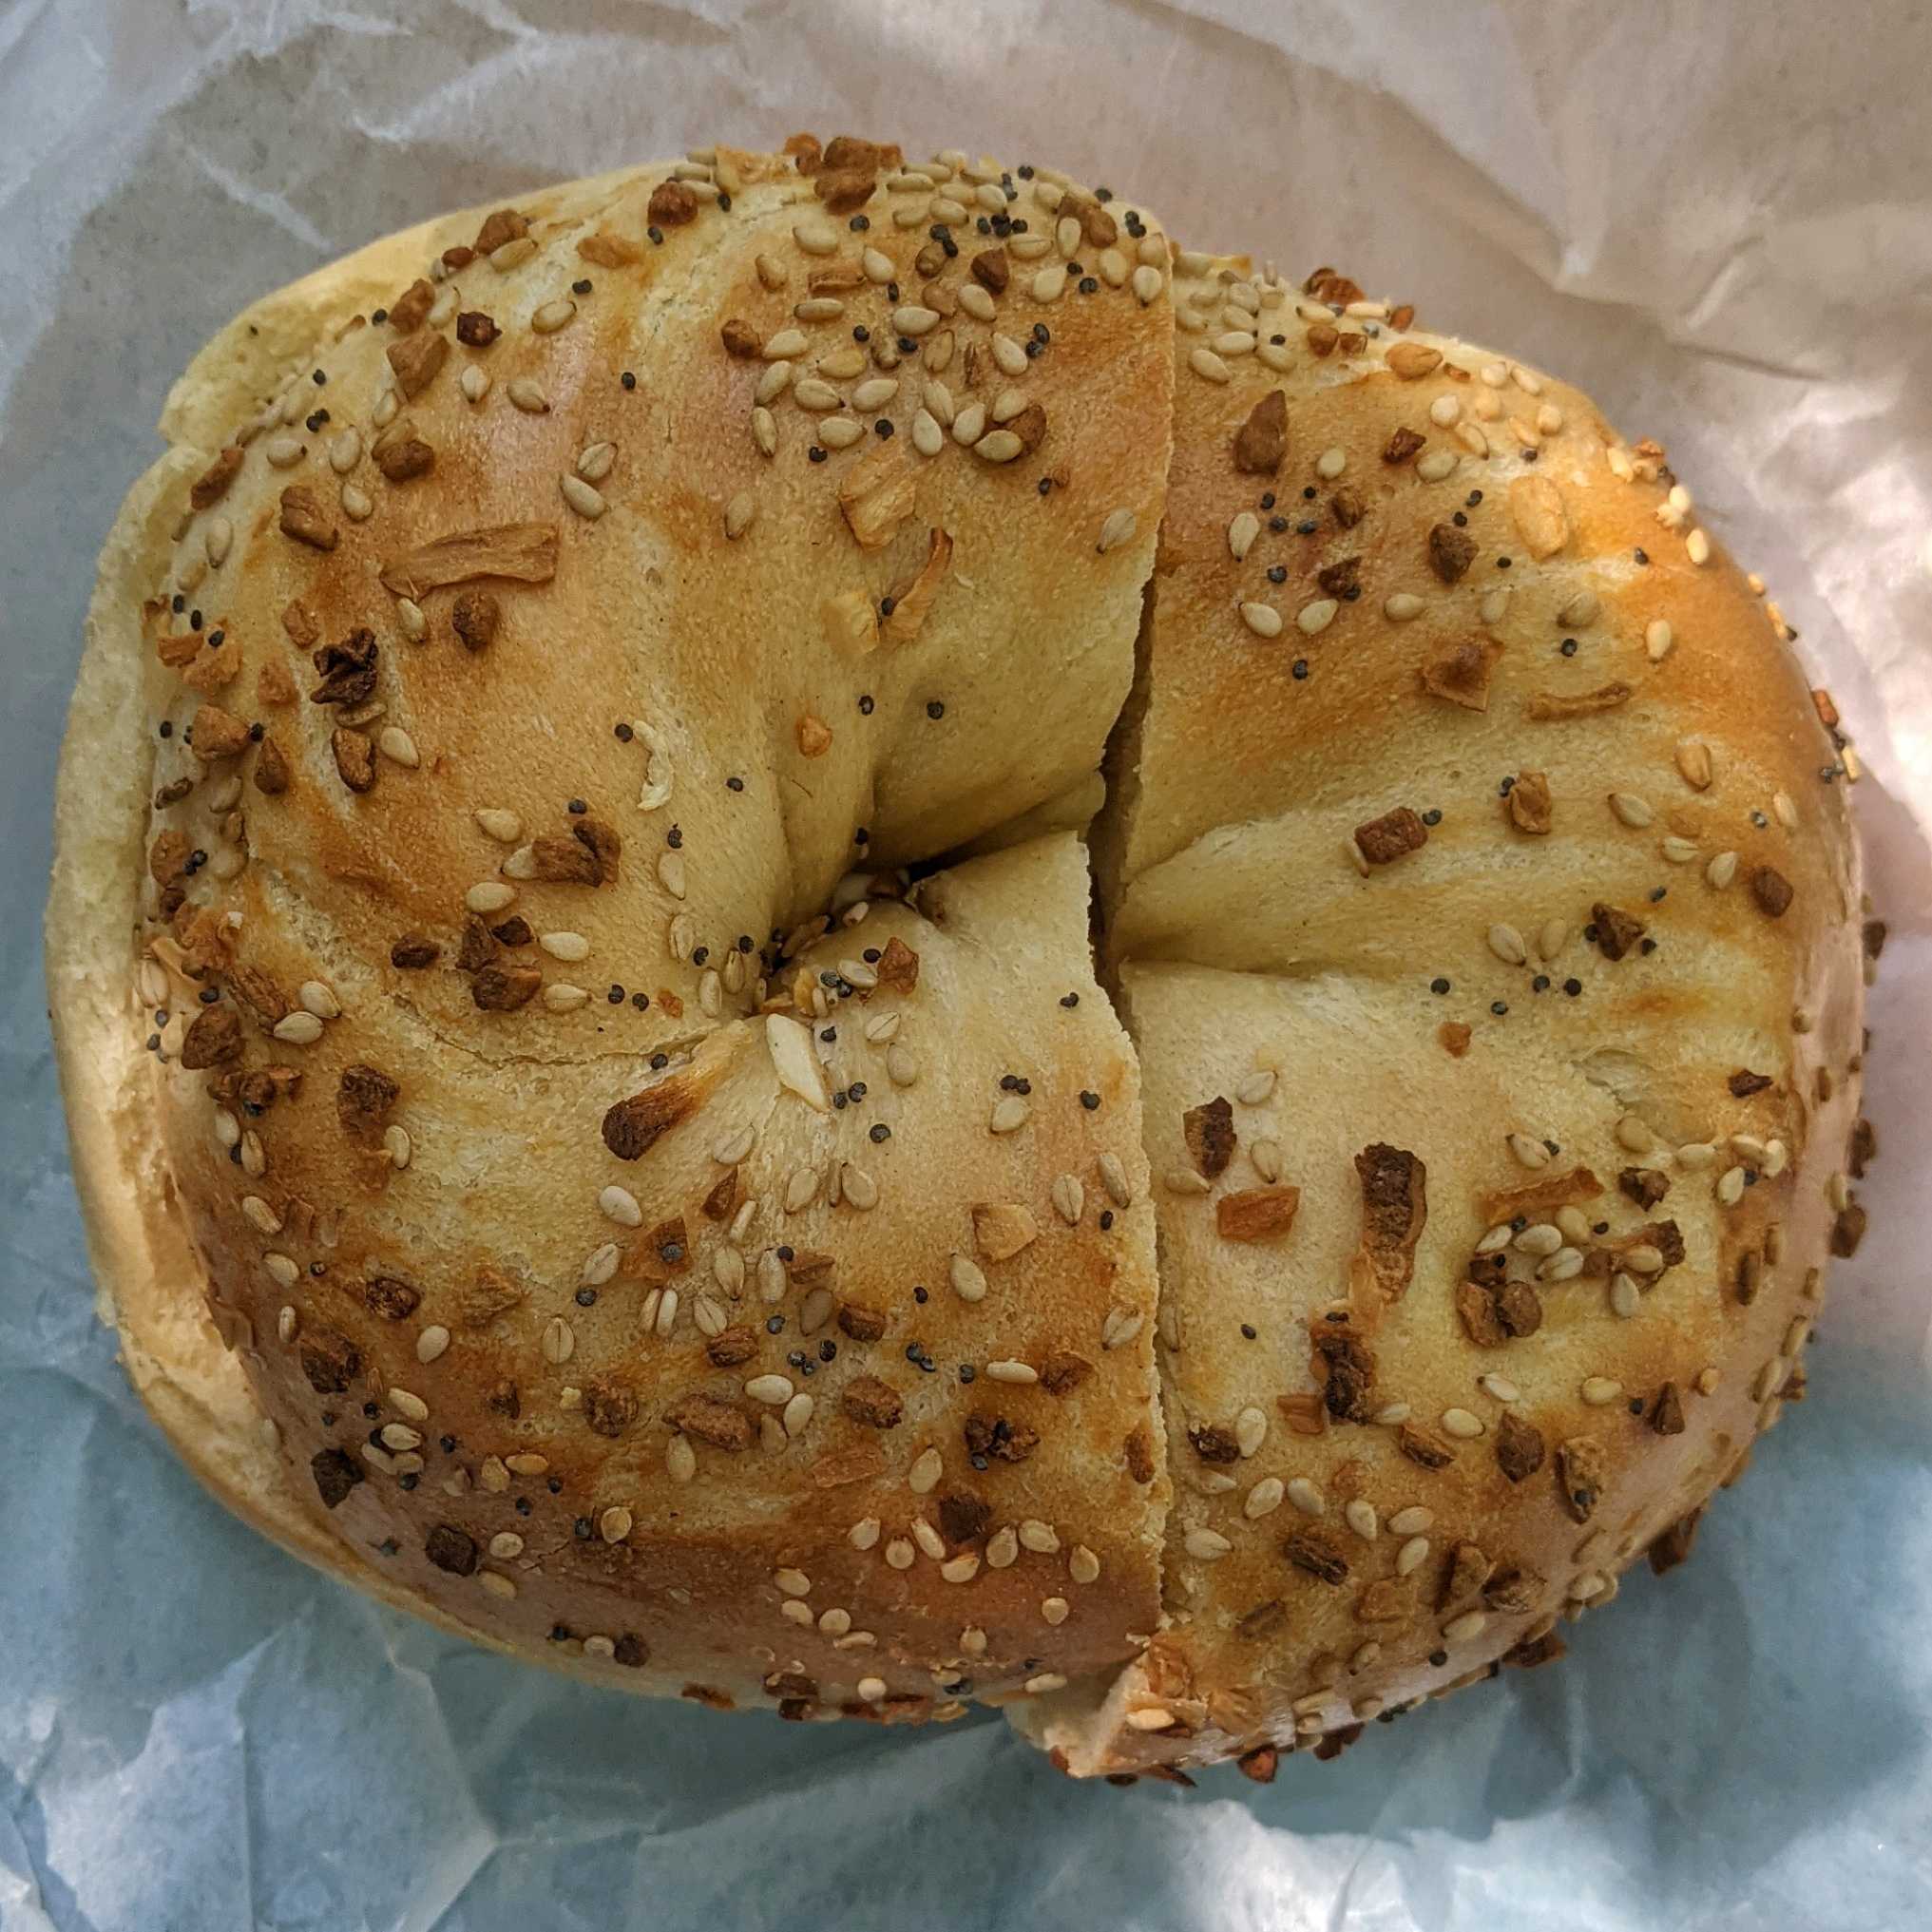 Bagelsmith - Bedford Ave